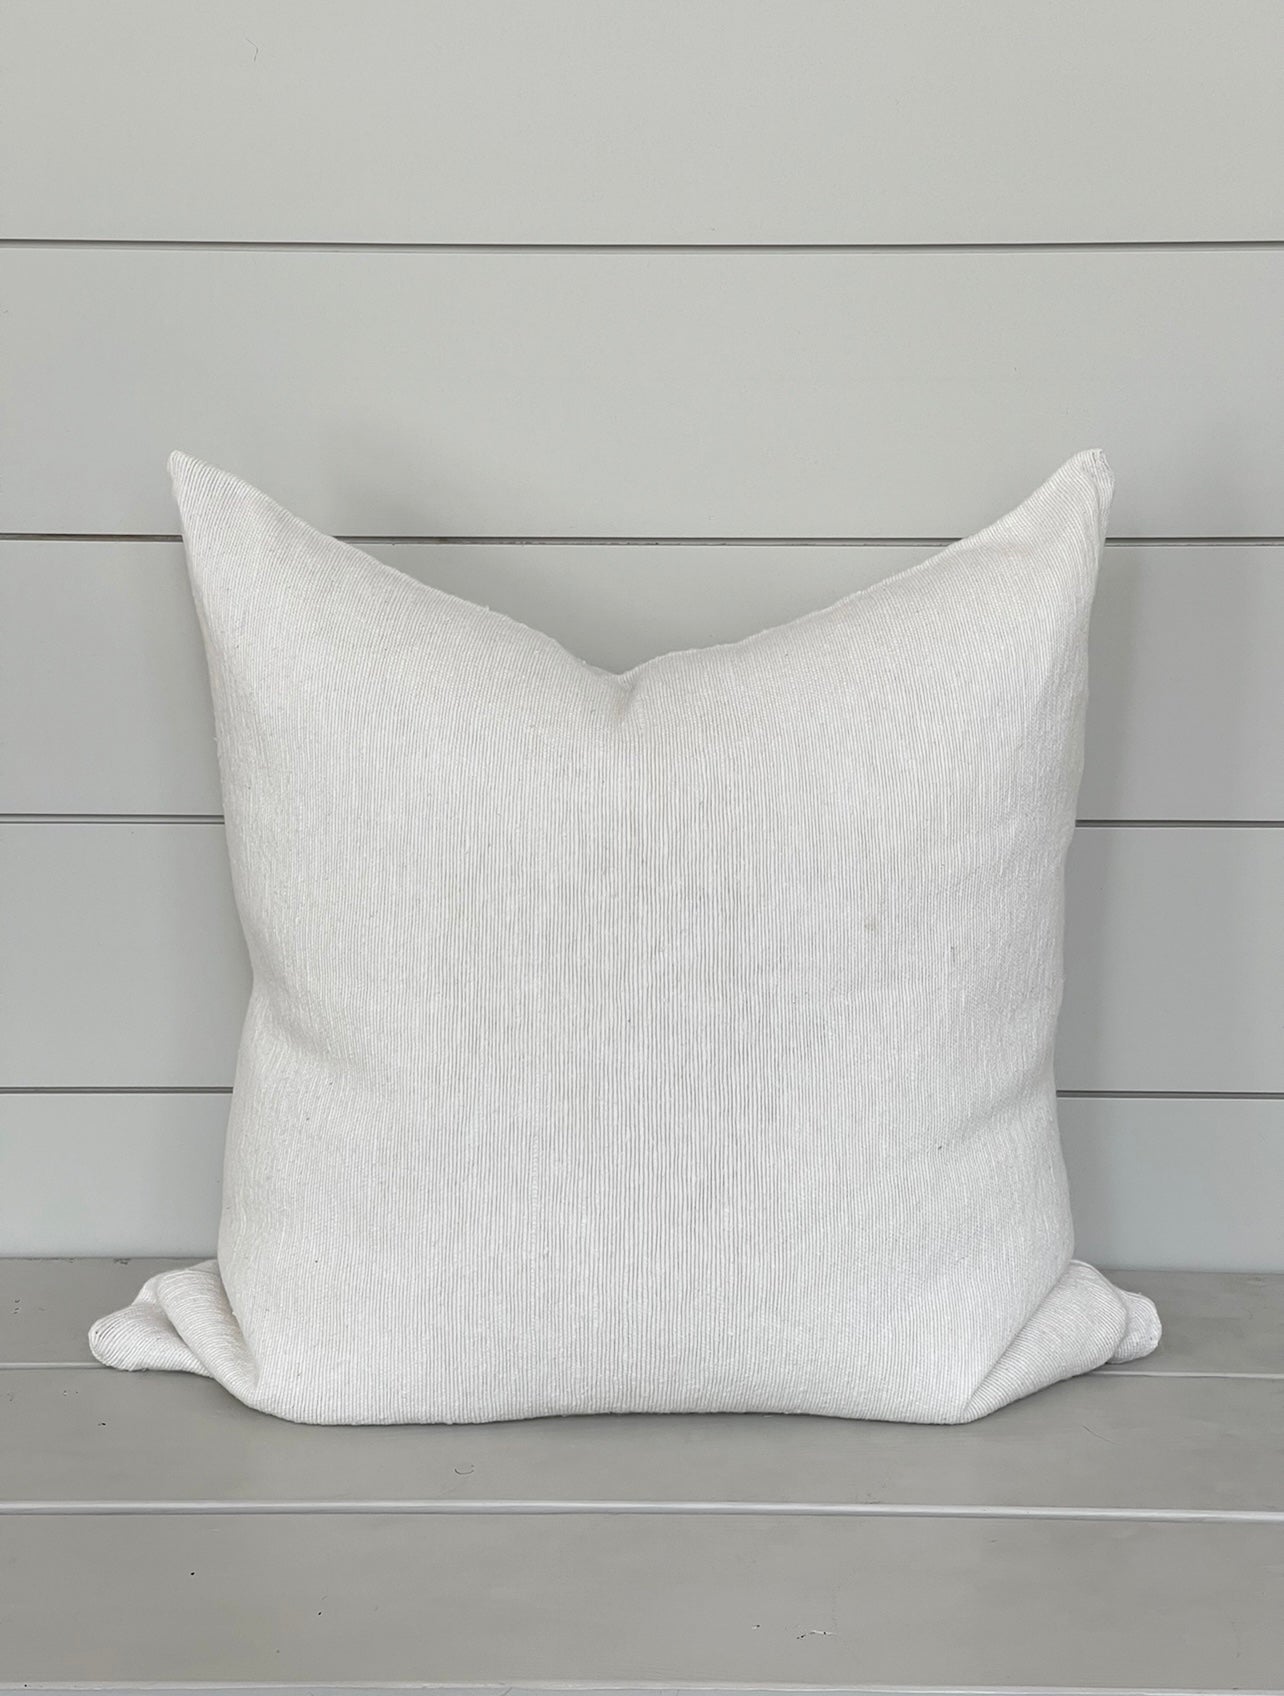 LAUREL CUSHION LIGHT WASHED WHITE living-homeaccents theboholab Square 20” x 20“  